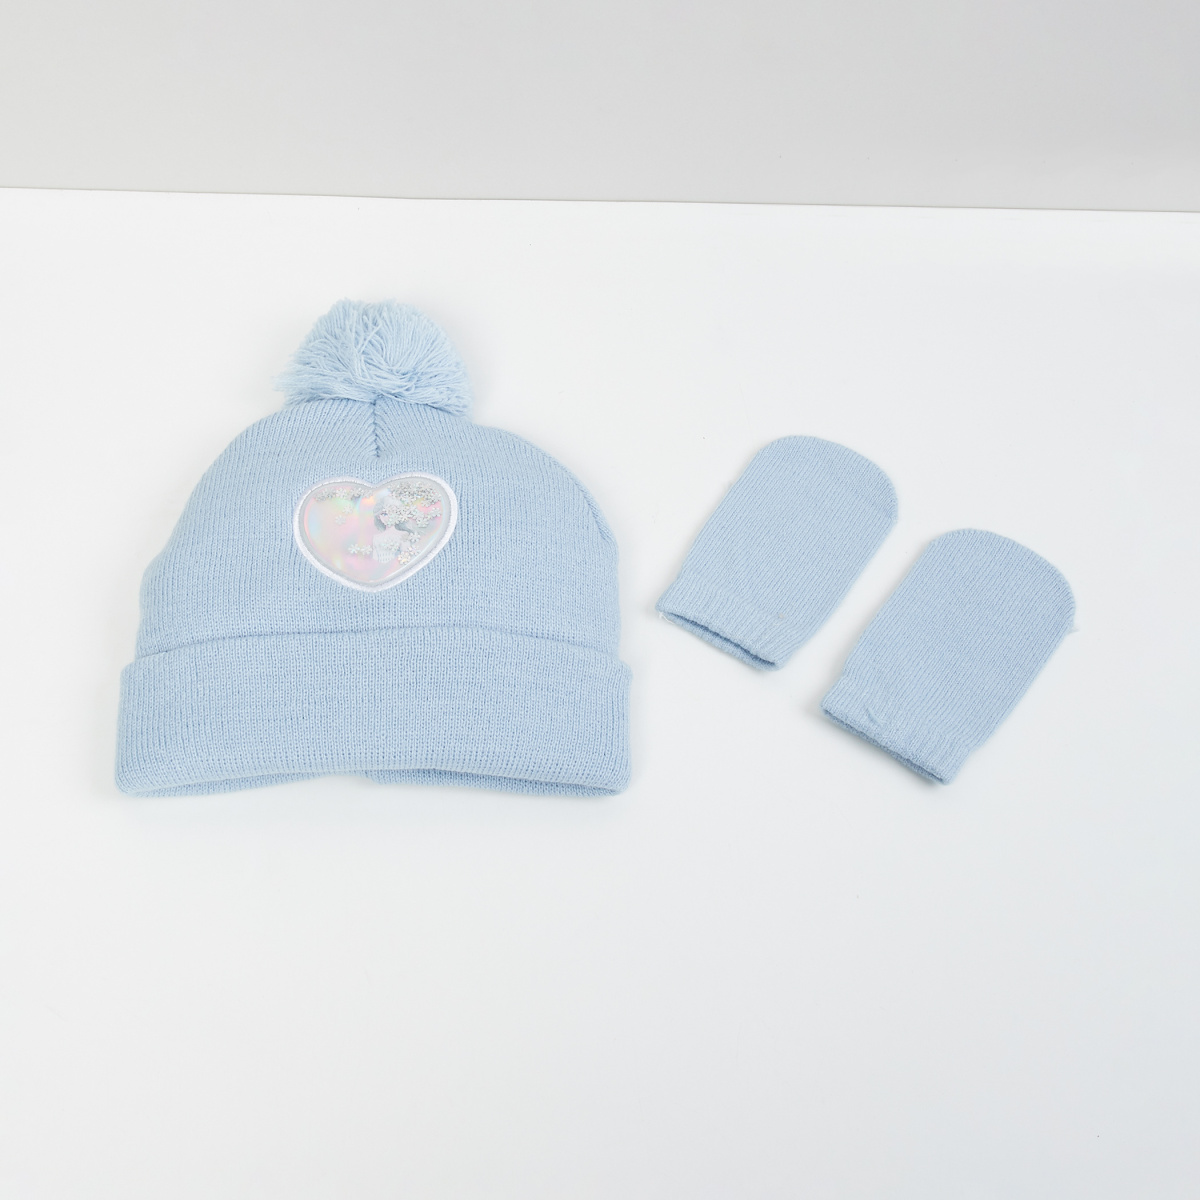 MAX Appliqued Beanie with Mittens